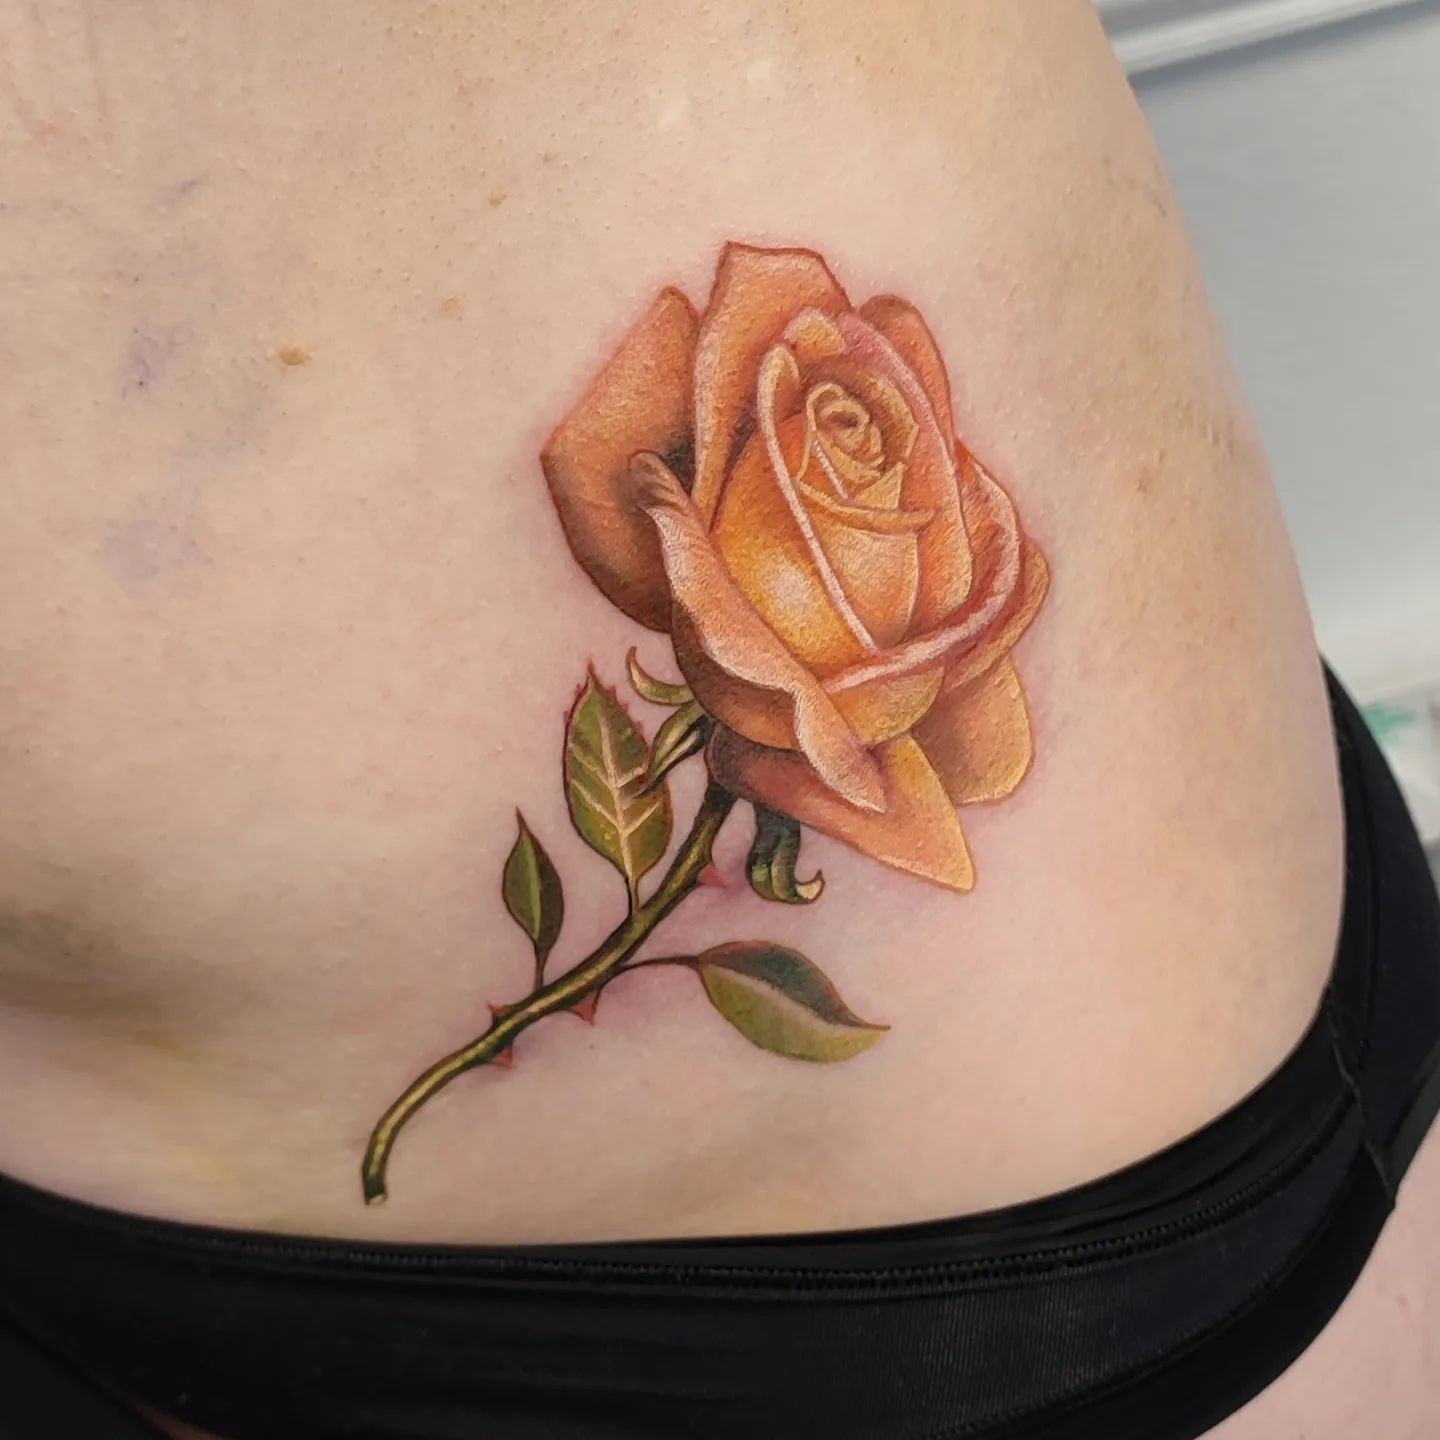 A tattoo on your hip can look so fun and feminine. Show that you’re a soft soul who likes natural beauty with this light orange design. A tattoo such as this one will take you 2-3 hours to get.